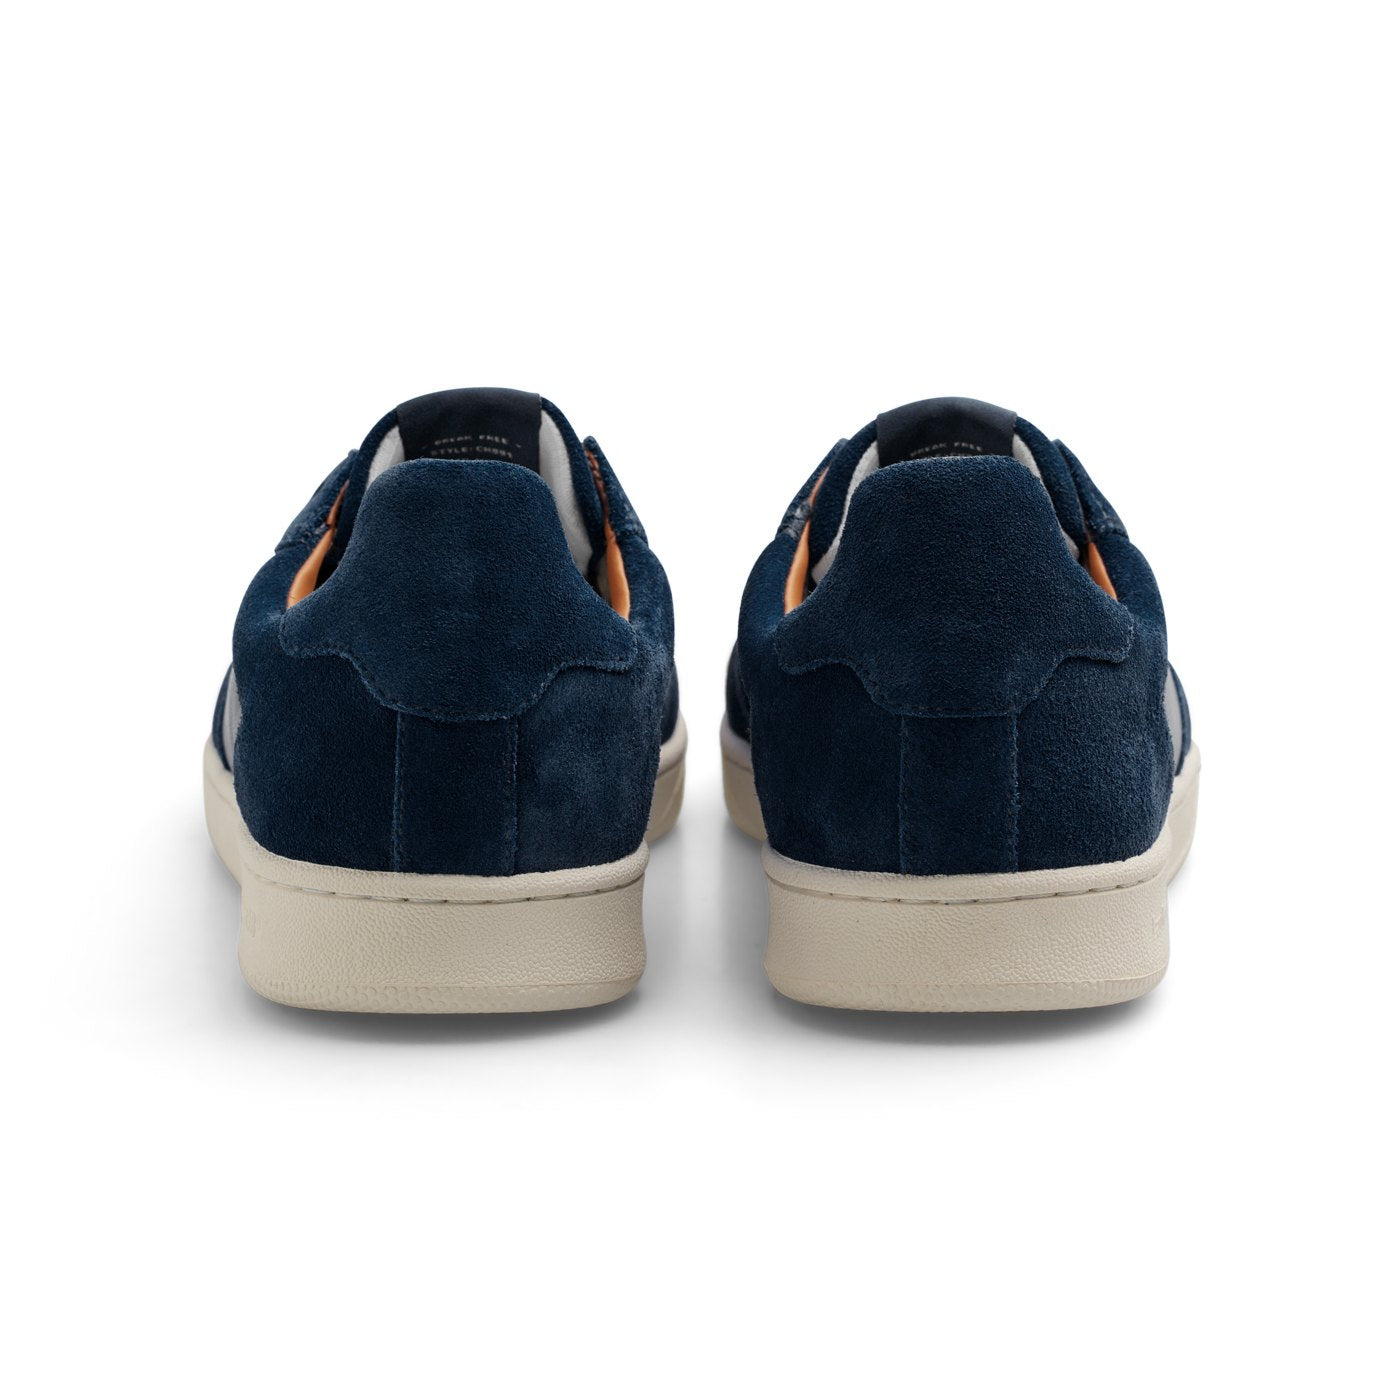 CM001-Lo Suede/Leather (Navy/White)